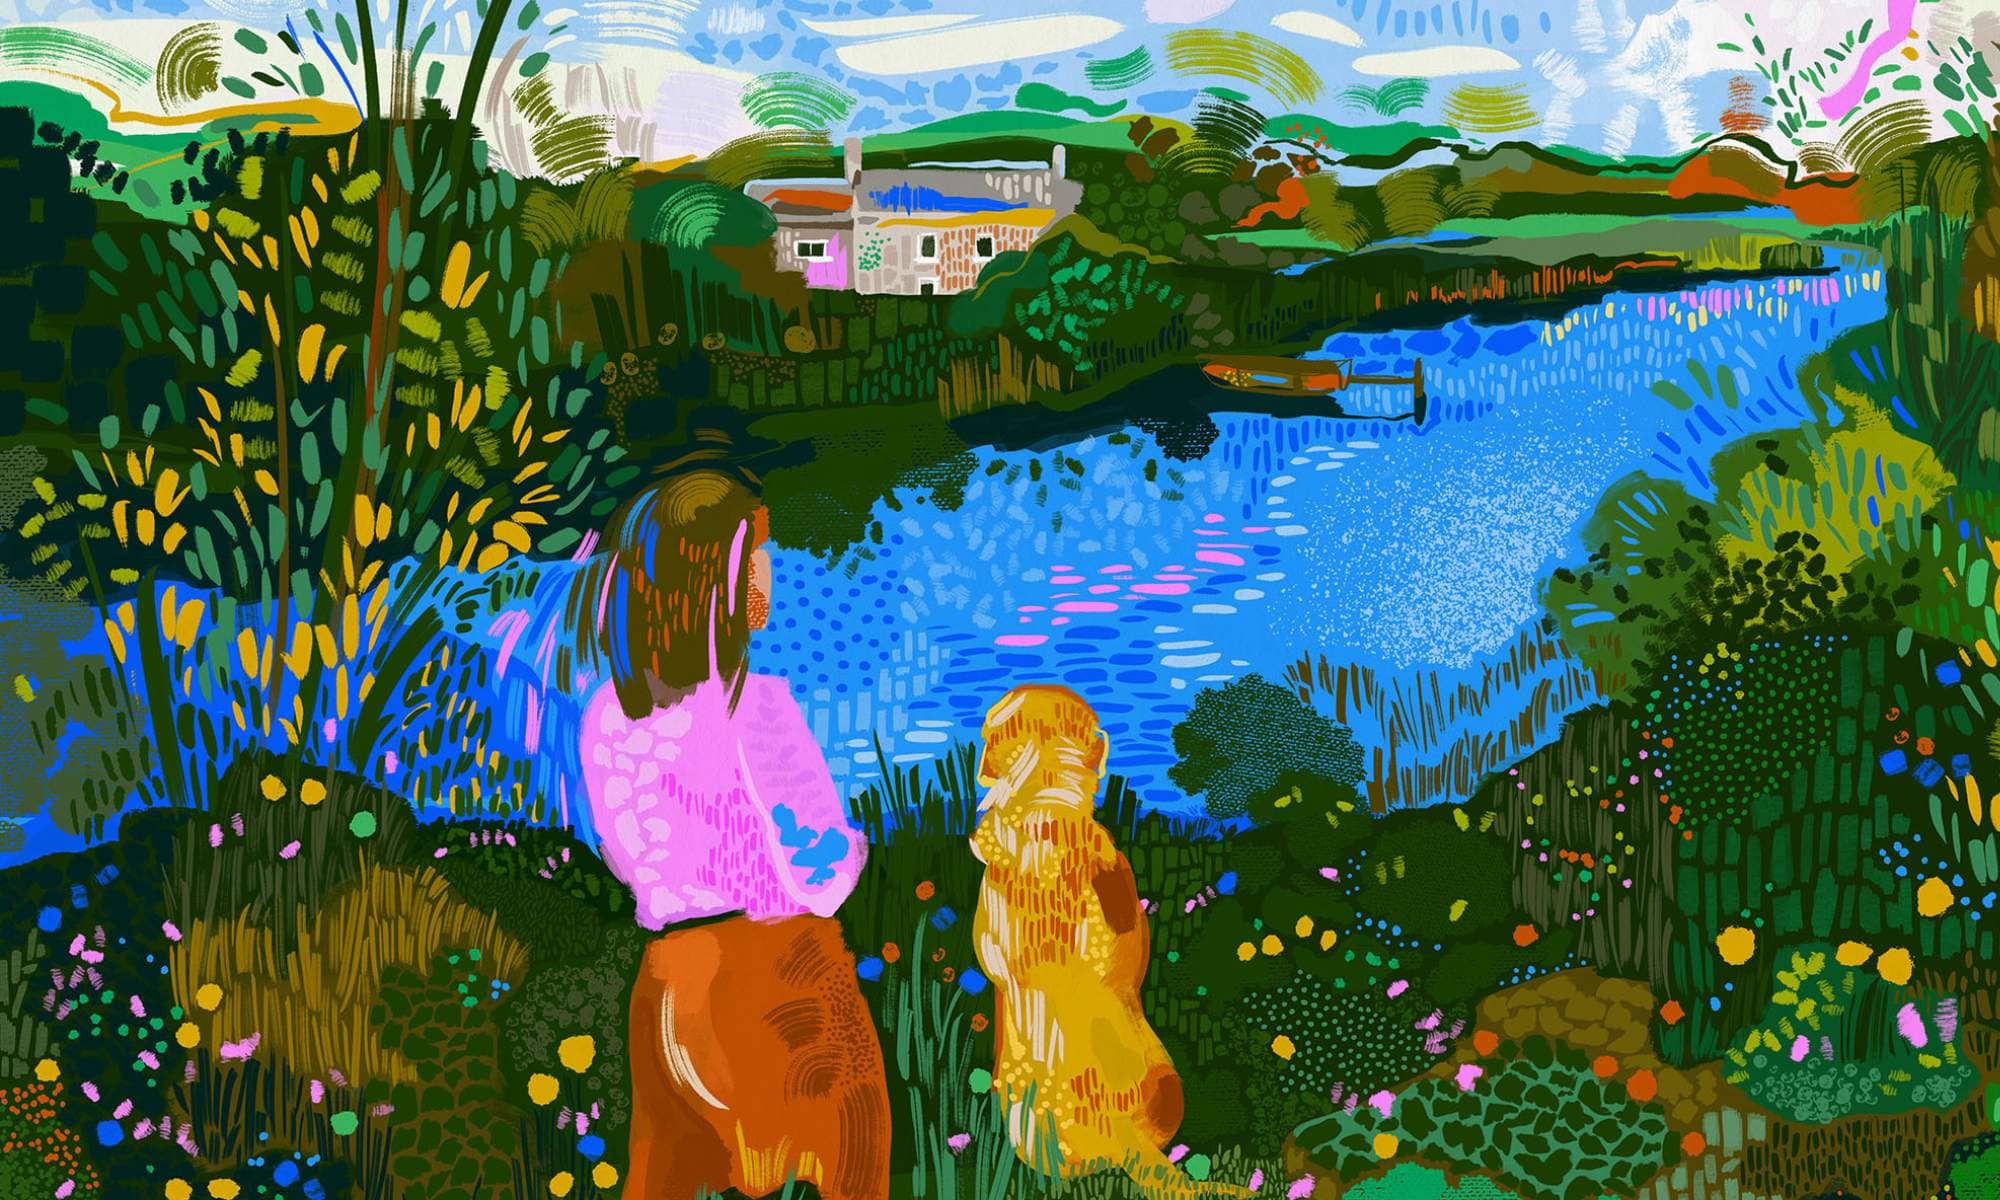 Colourful illustration showing the microbial diversity of the pond at Spirthill, with Katie Allen and Kit the dog in the foreground.